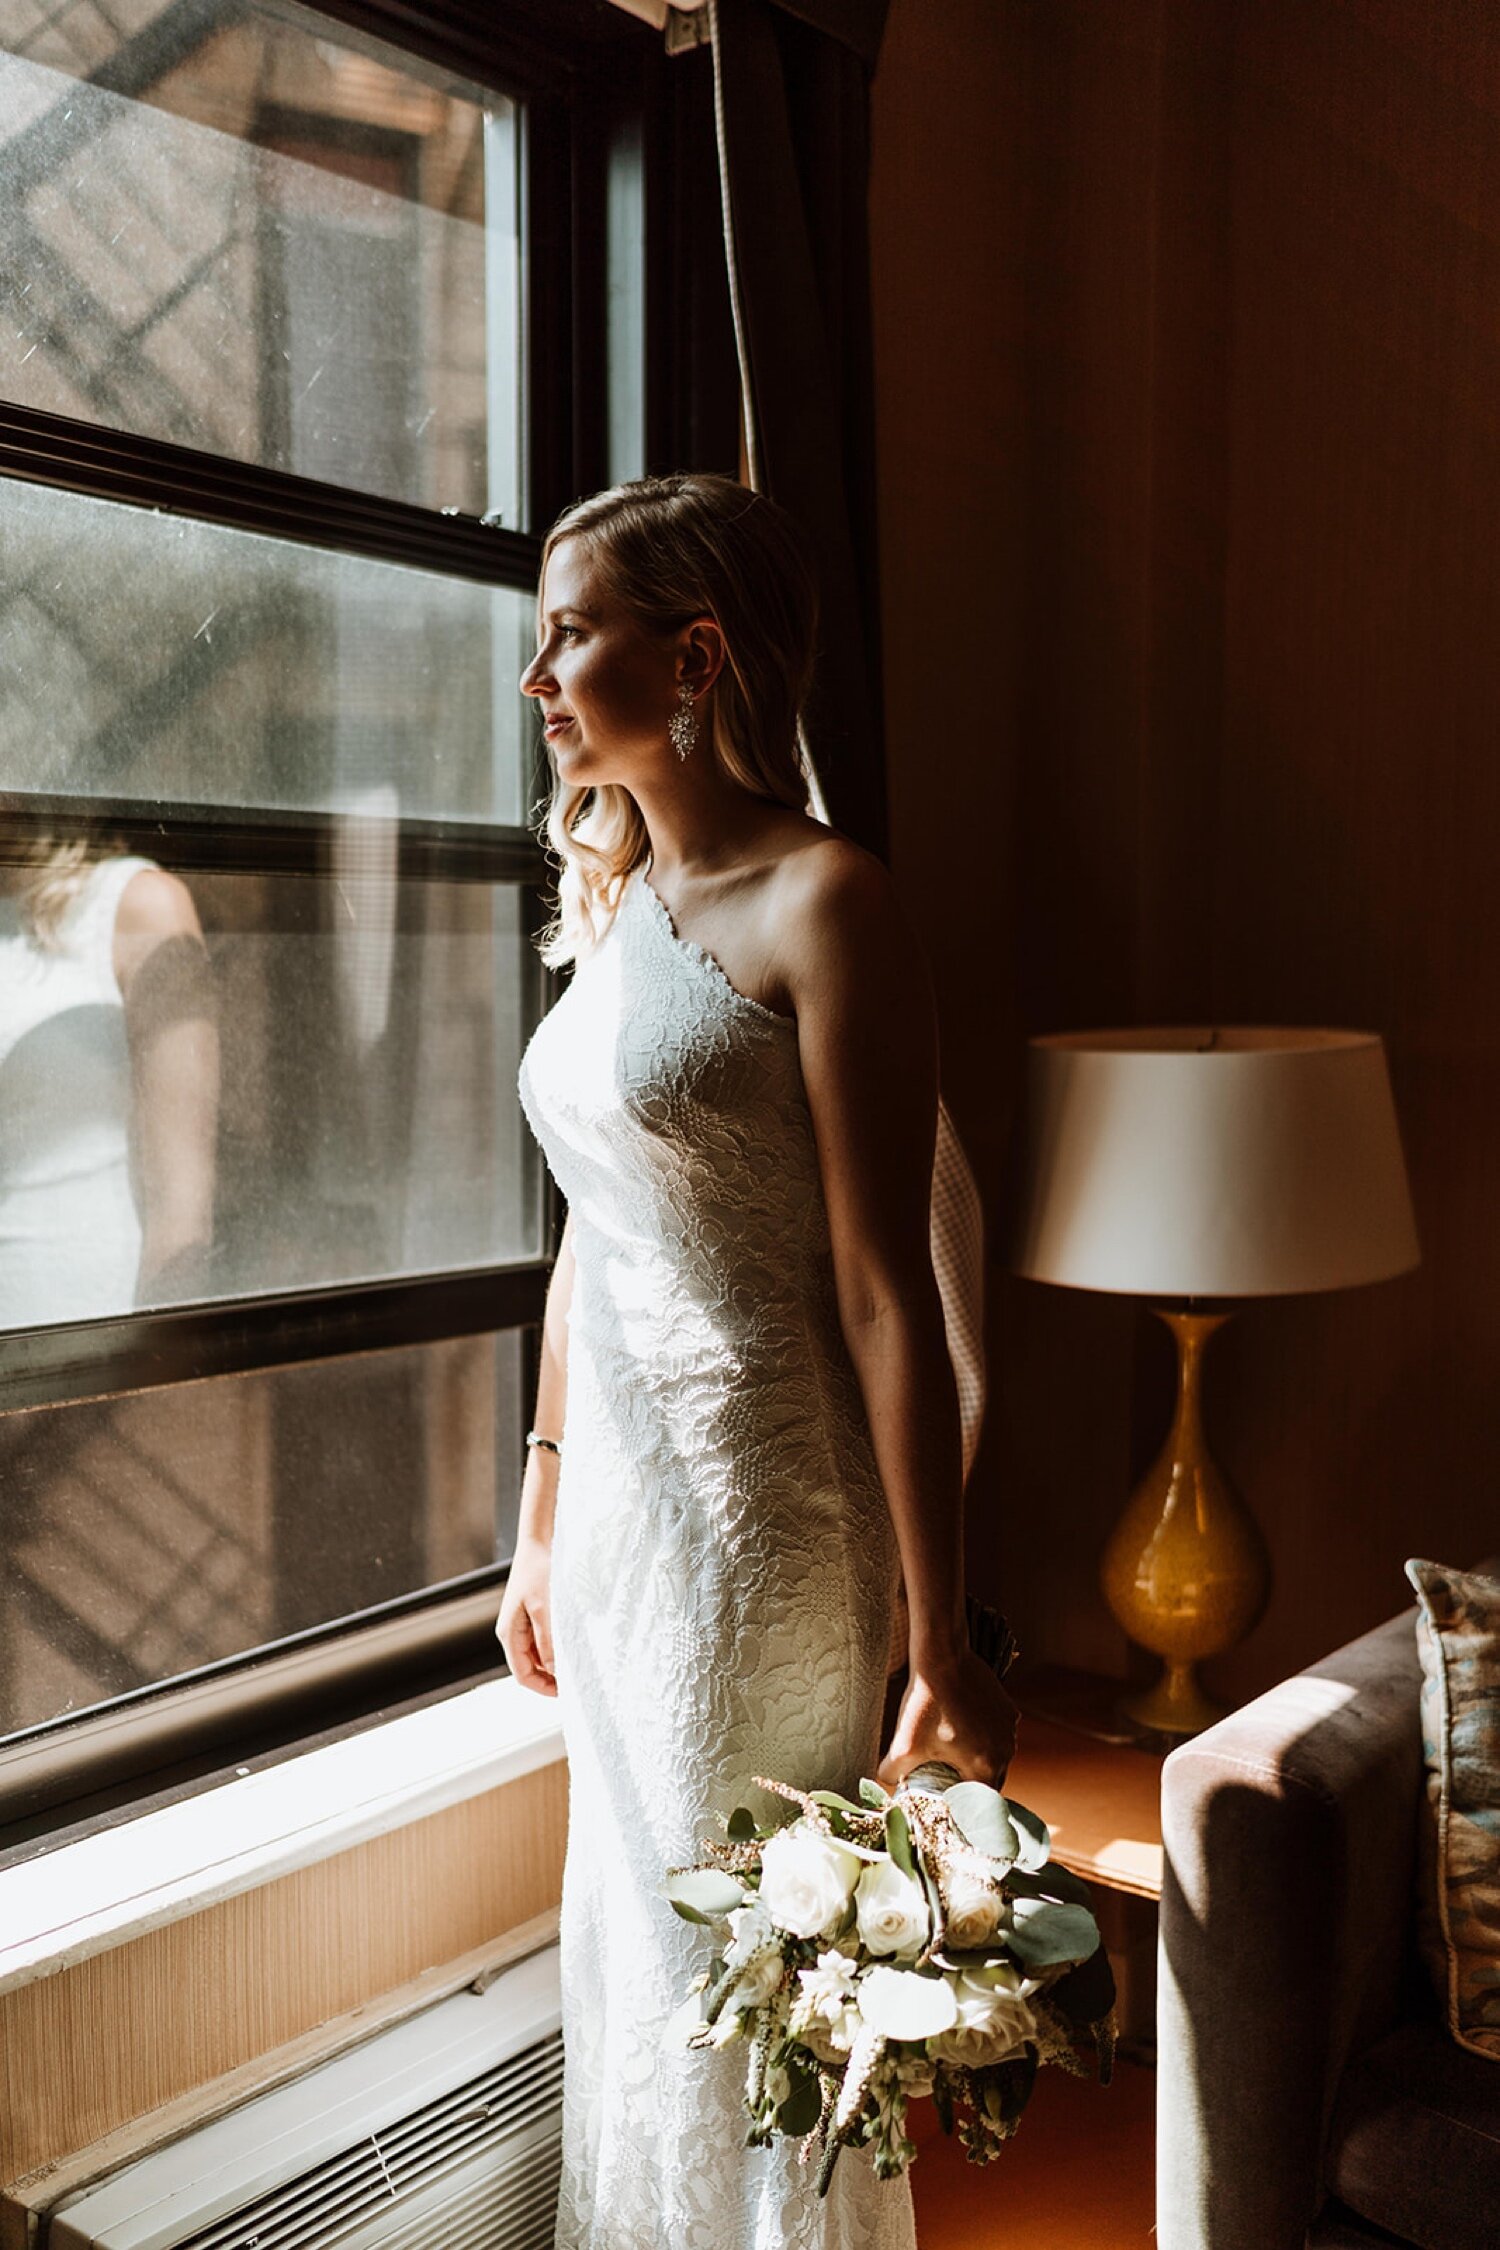 Bride looks out the window the morning of her wedding